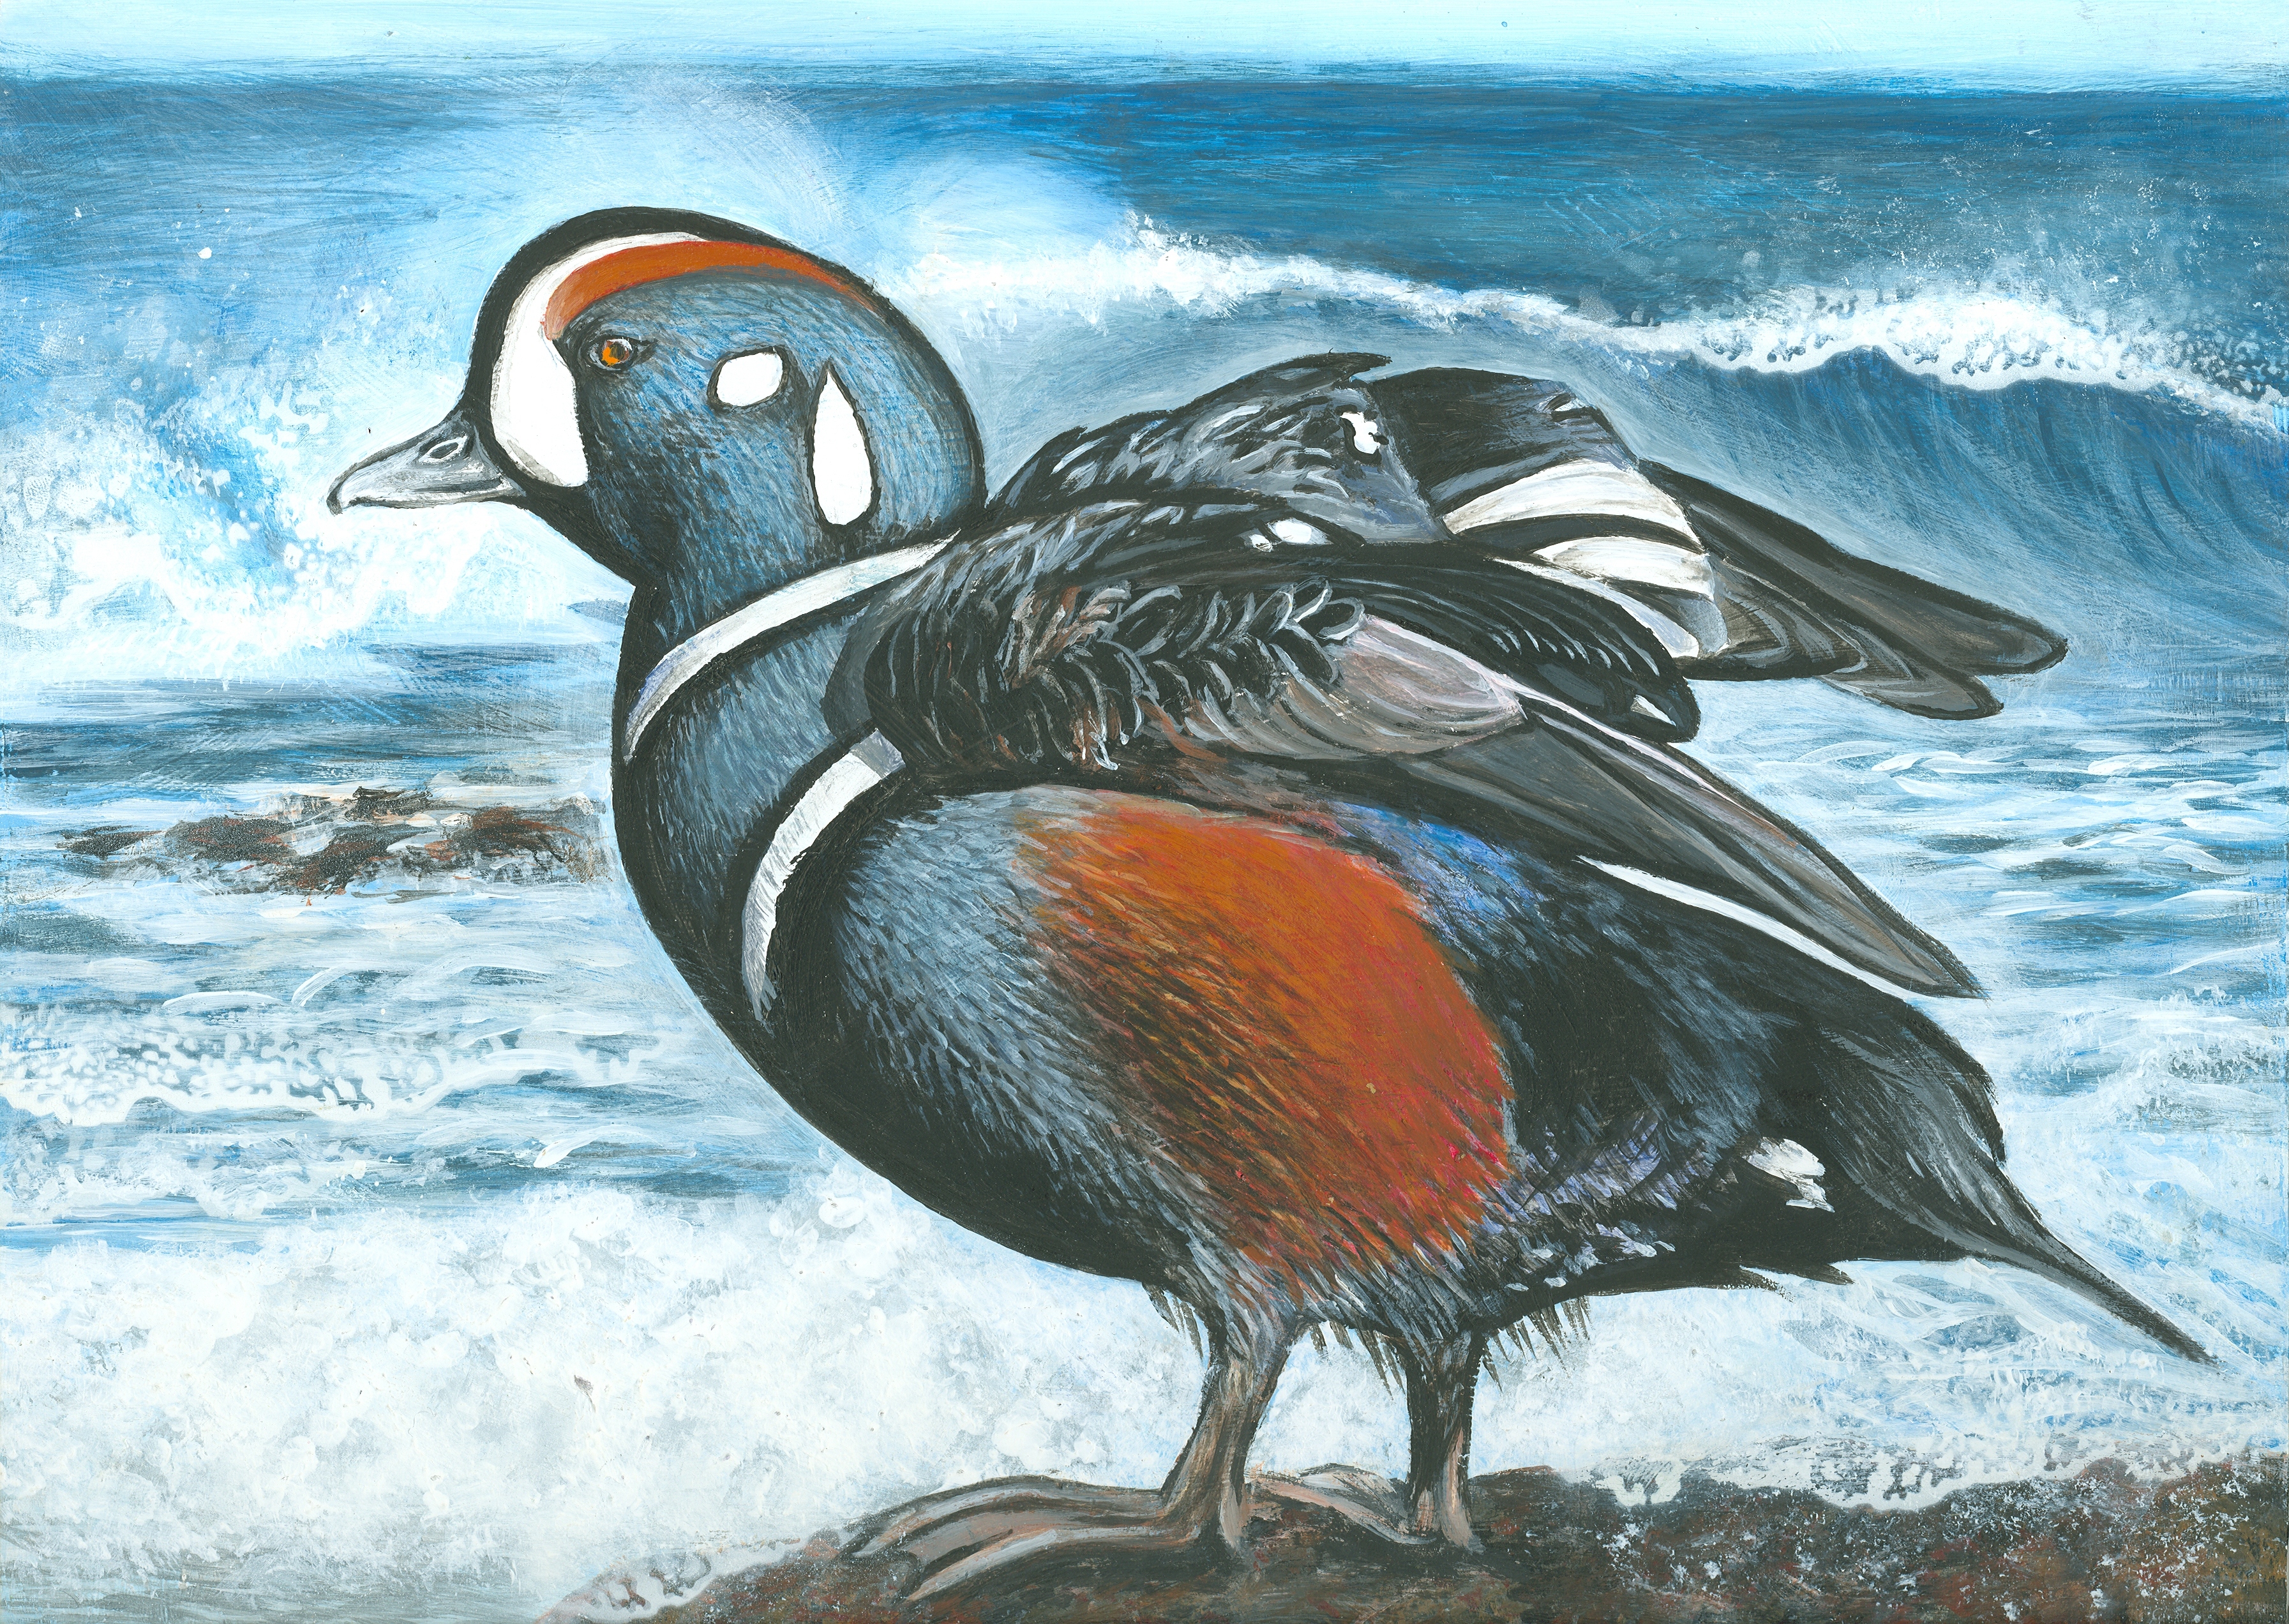 The finalist from Arizona for the 2011 Junior Duck Stamp Art Contest. (5597870117)